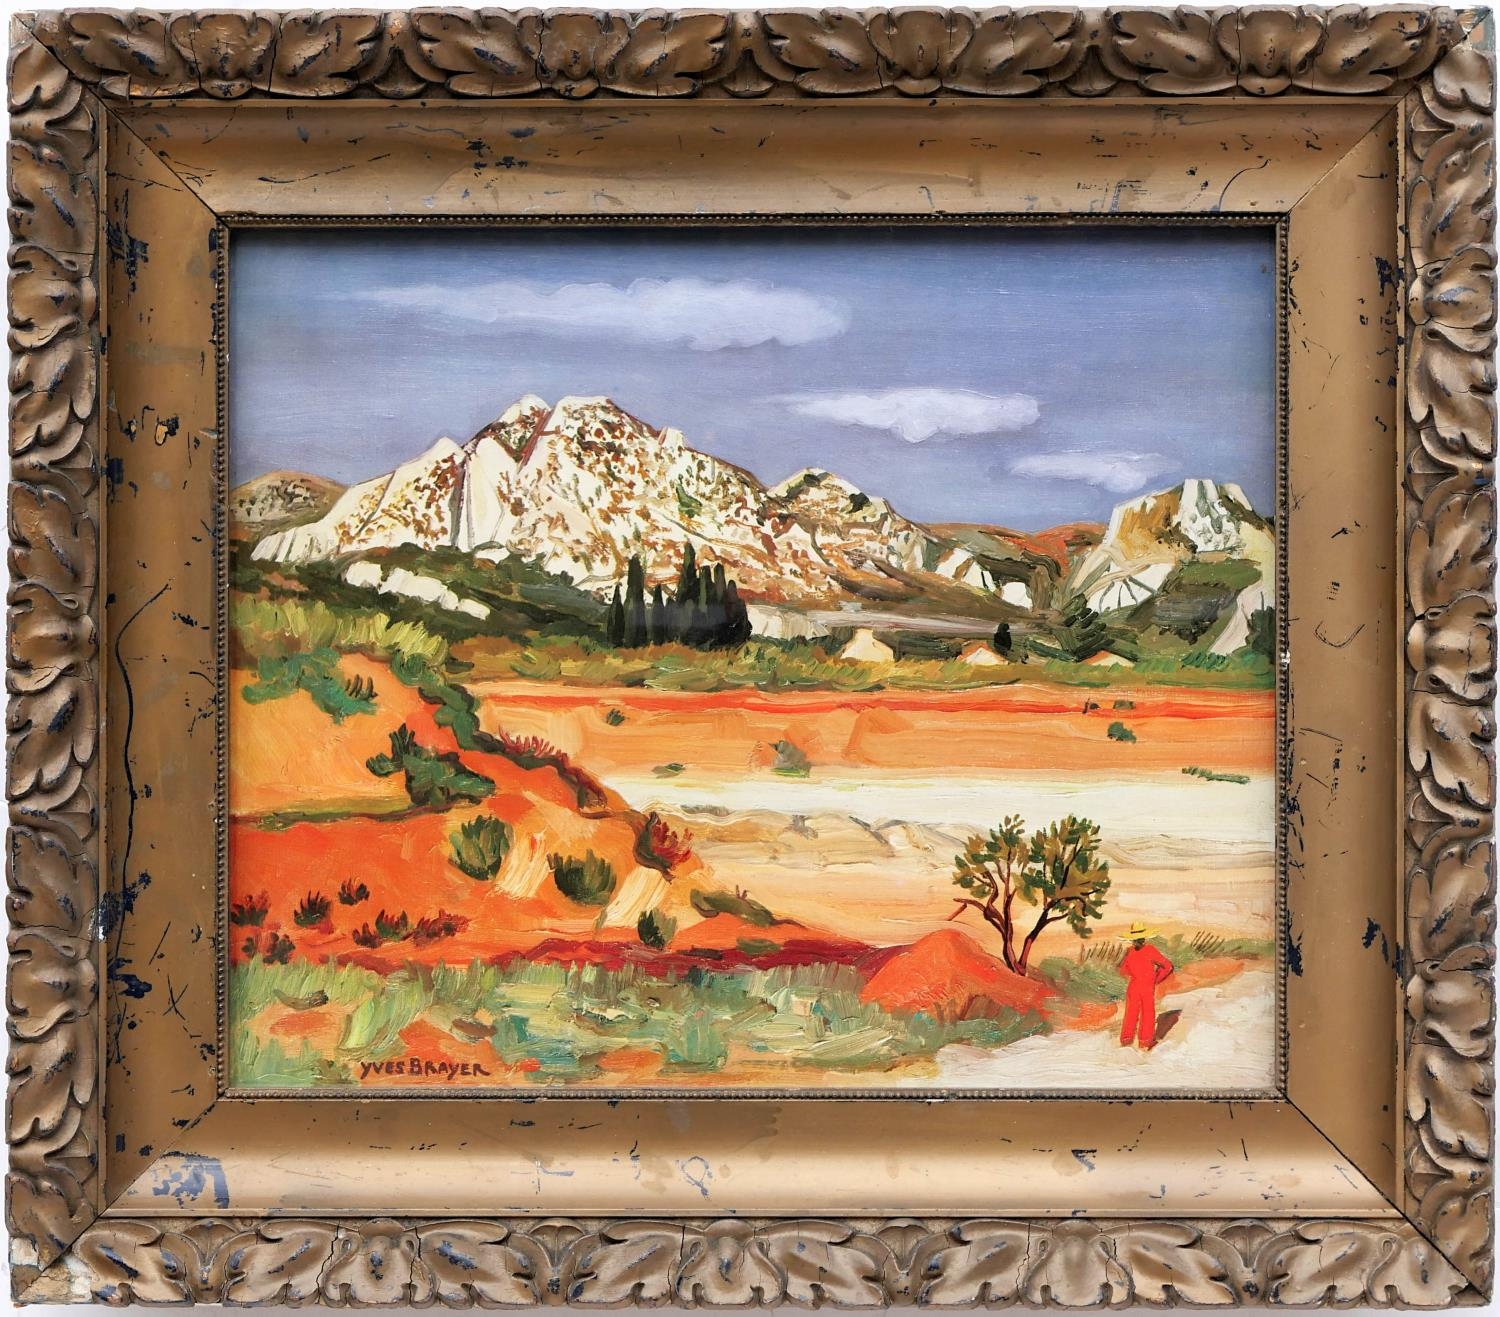 After YVES BRAYER (French, 1907 ? 1990) 'Provence', quadrichome, signed in the plate, 37cm x 25cm,